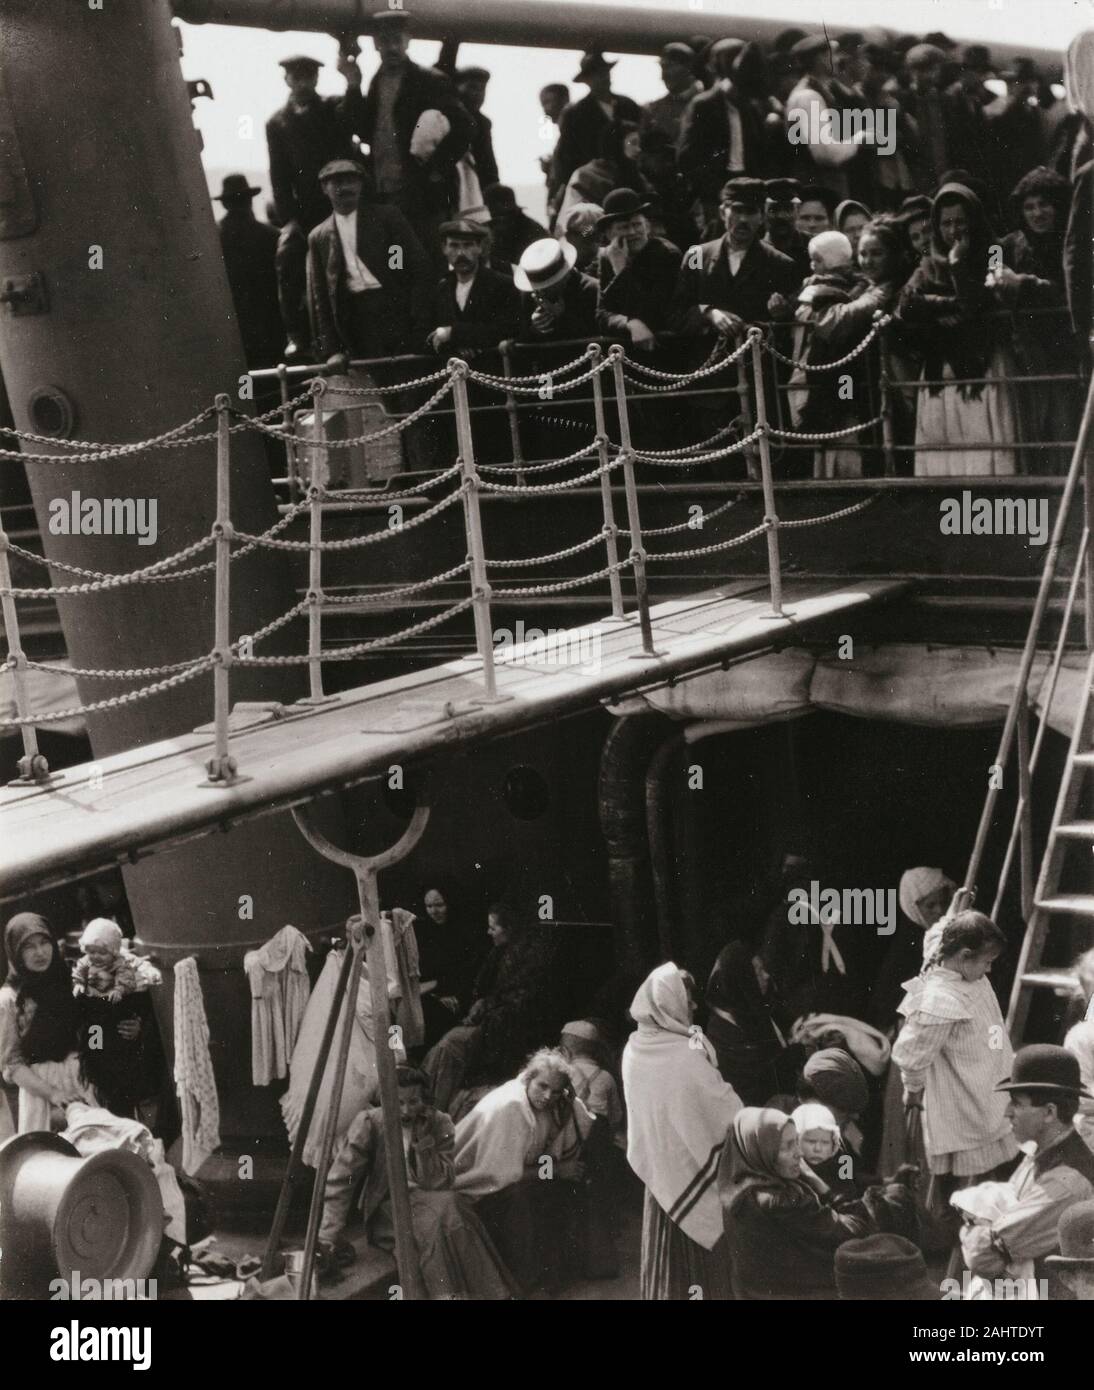 Alfred Stieglitz. The Steerage. 1907. United States. Gelatin silver print Alfred Stieglitz shot this photograph in 1907, during a voyage by ocean liner to Europe; it was years, however, before he and others in his circle came to recognize it as a defining work of modernism, showing that photography could transcend its ostensible subject to depict deeper emotions. He later described the moment when, desperate to escape the stuffy upper classes, he looked down to the steerage level “I saw shapes related to each other. I saw a picture of shapes and underlying that the feeling I had about life.”Fo Stock Photo